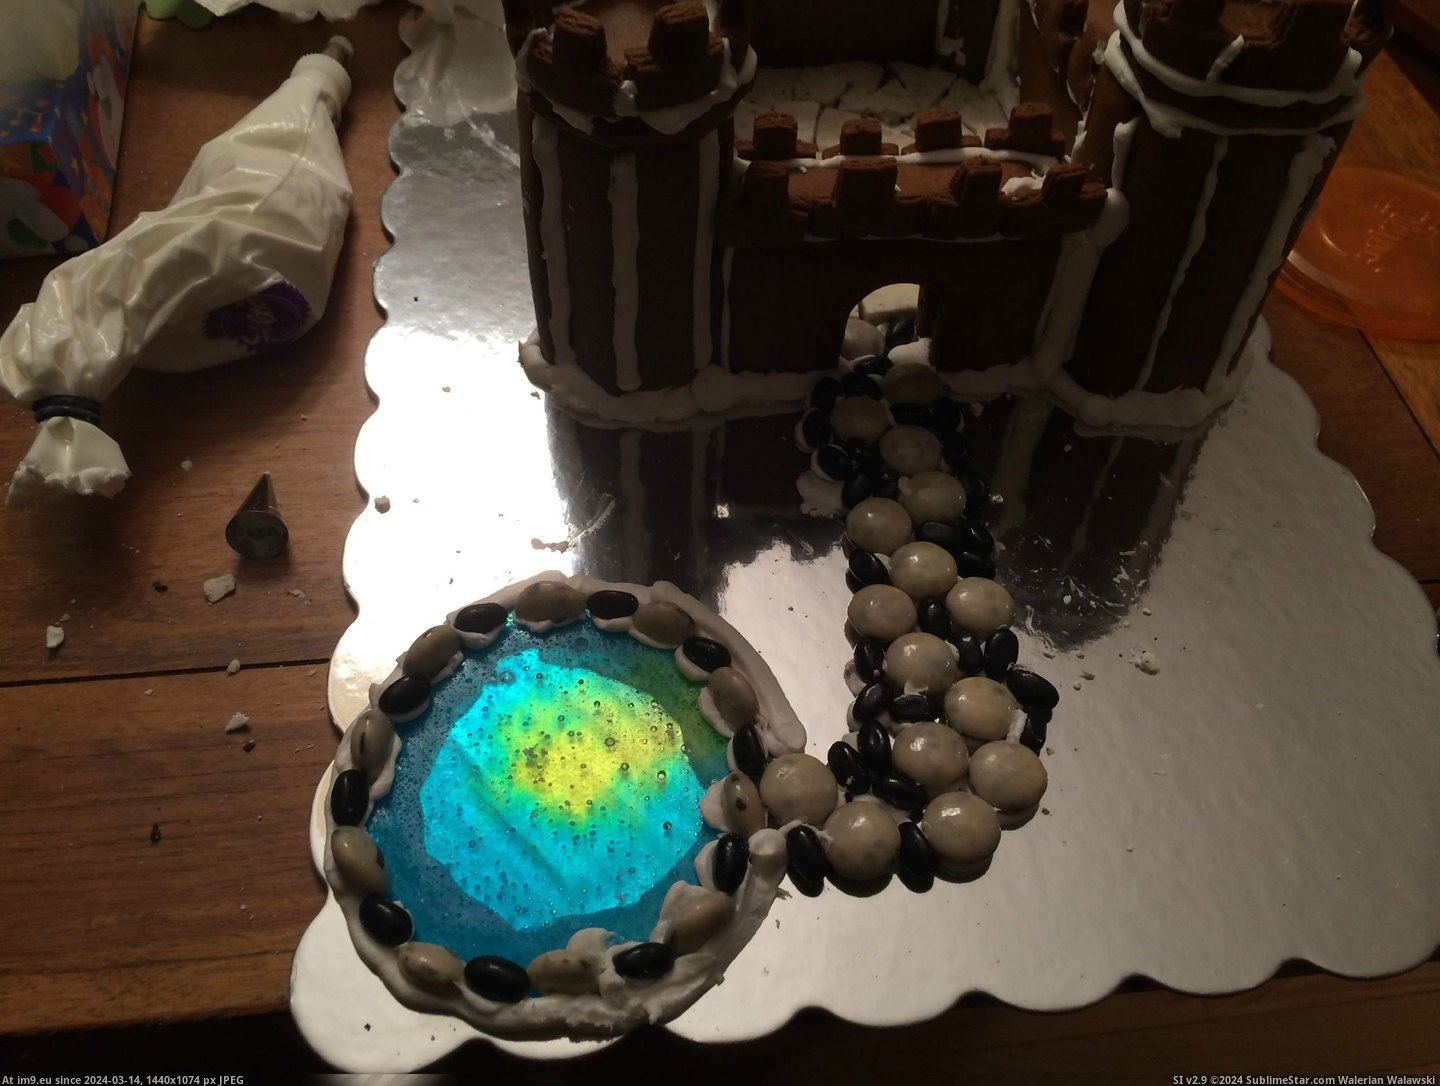 #Husband #Get #Our #Divorced #Collaborated #Project #Gingerbread #Success [Pics] My husband and I collaborated on our first gingerbread project and didn't get divorced...success! 18 Pic. (Bild von album My r/PICS favs))